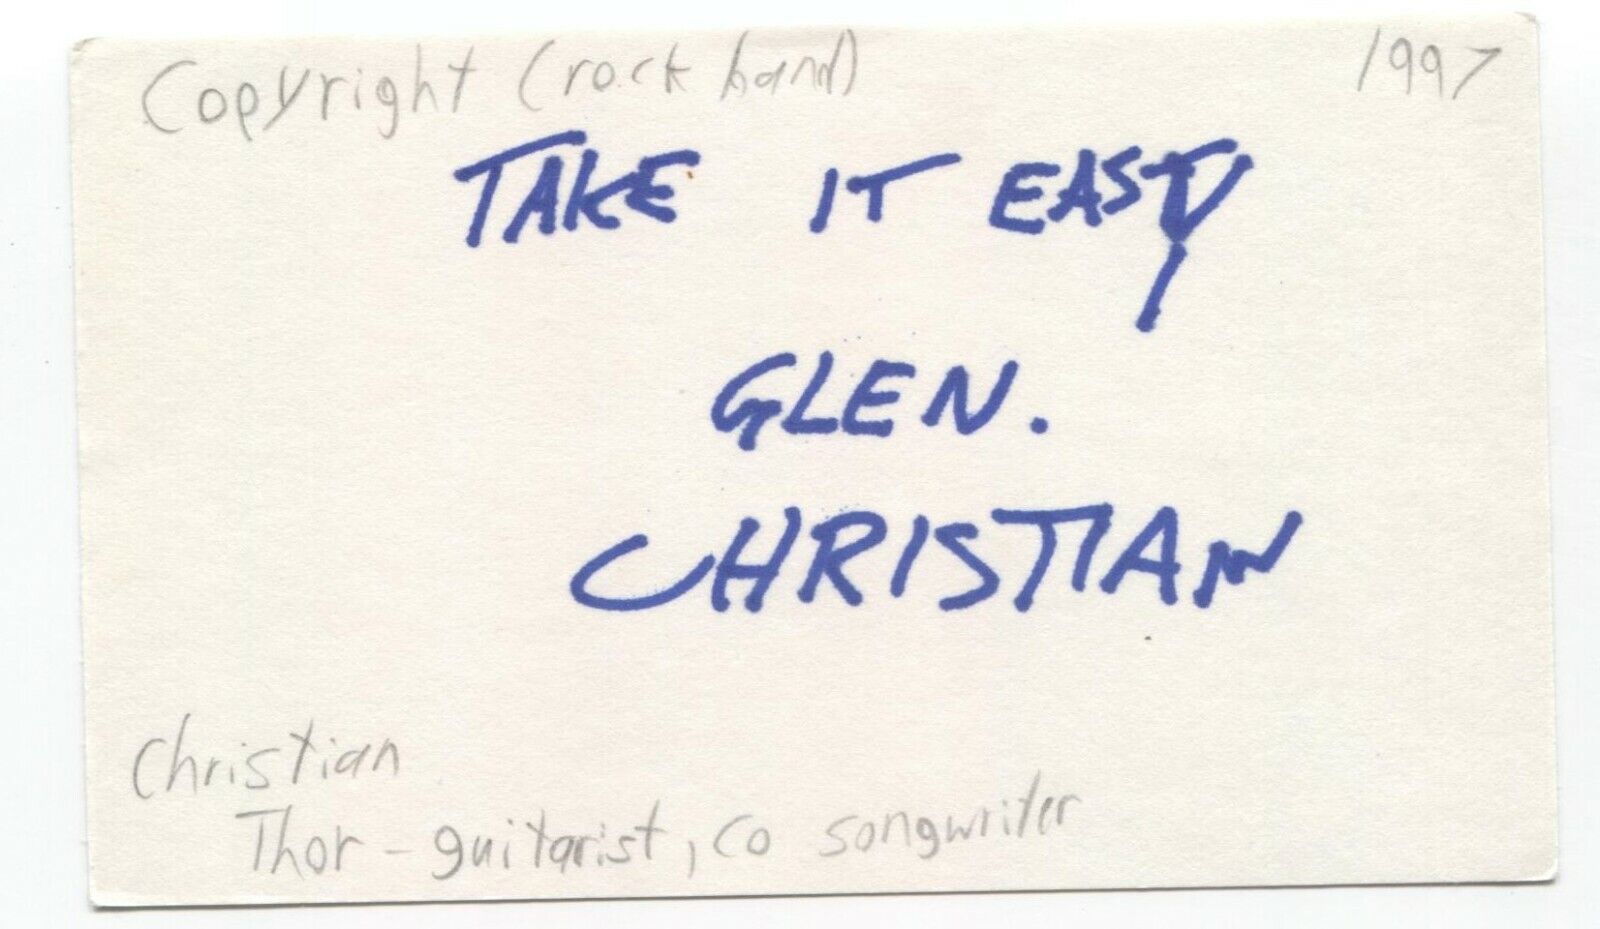 Copyright - Christian Thorvaldson Signed 3x5 Index Card Autographed Signature